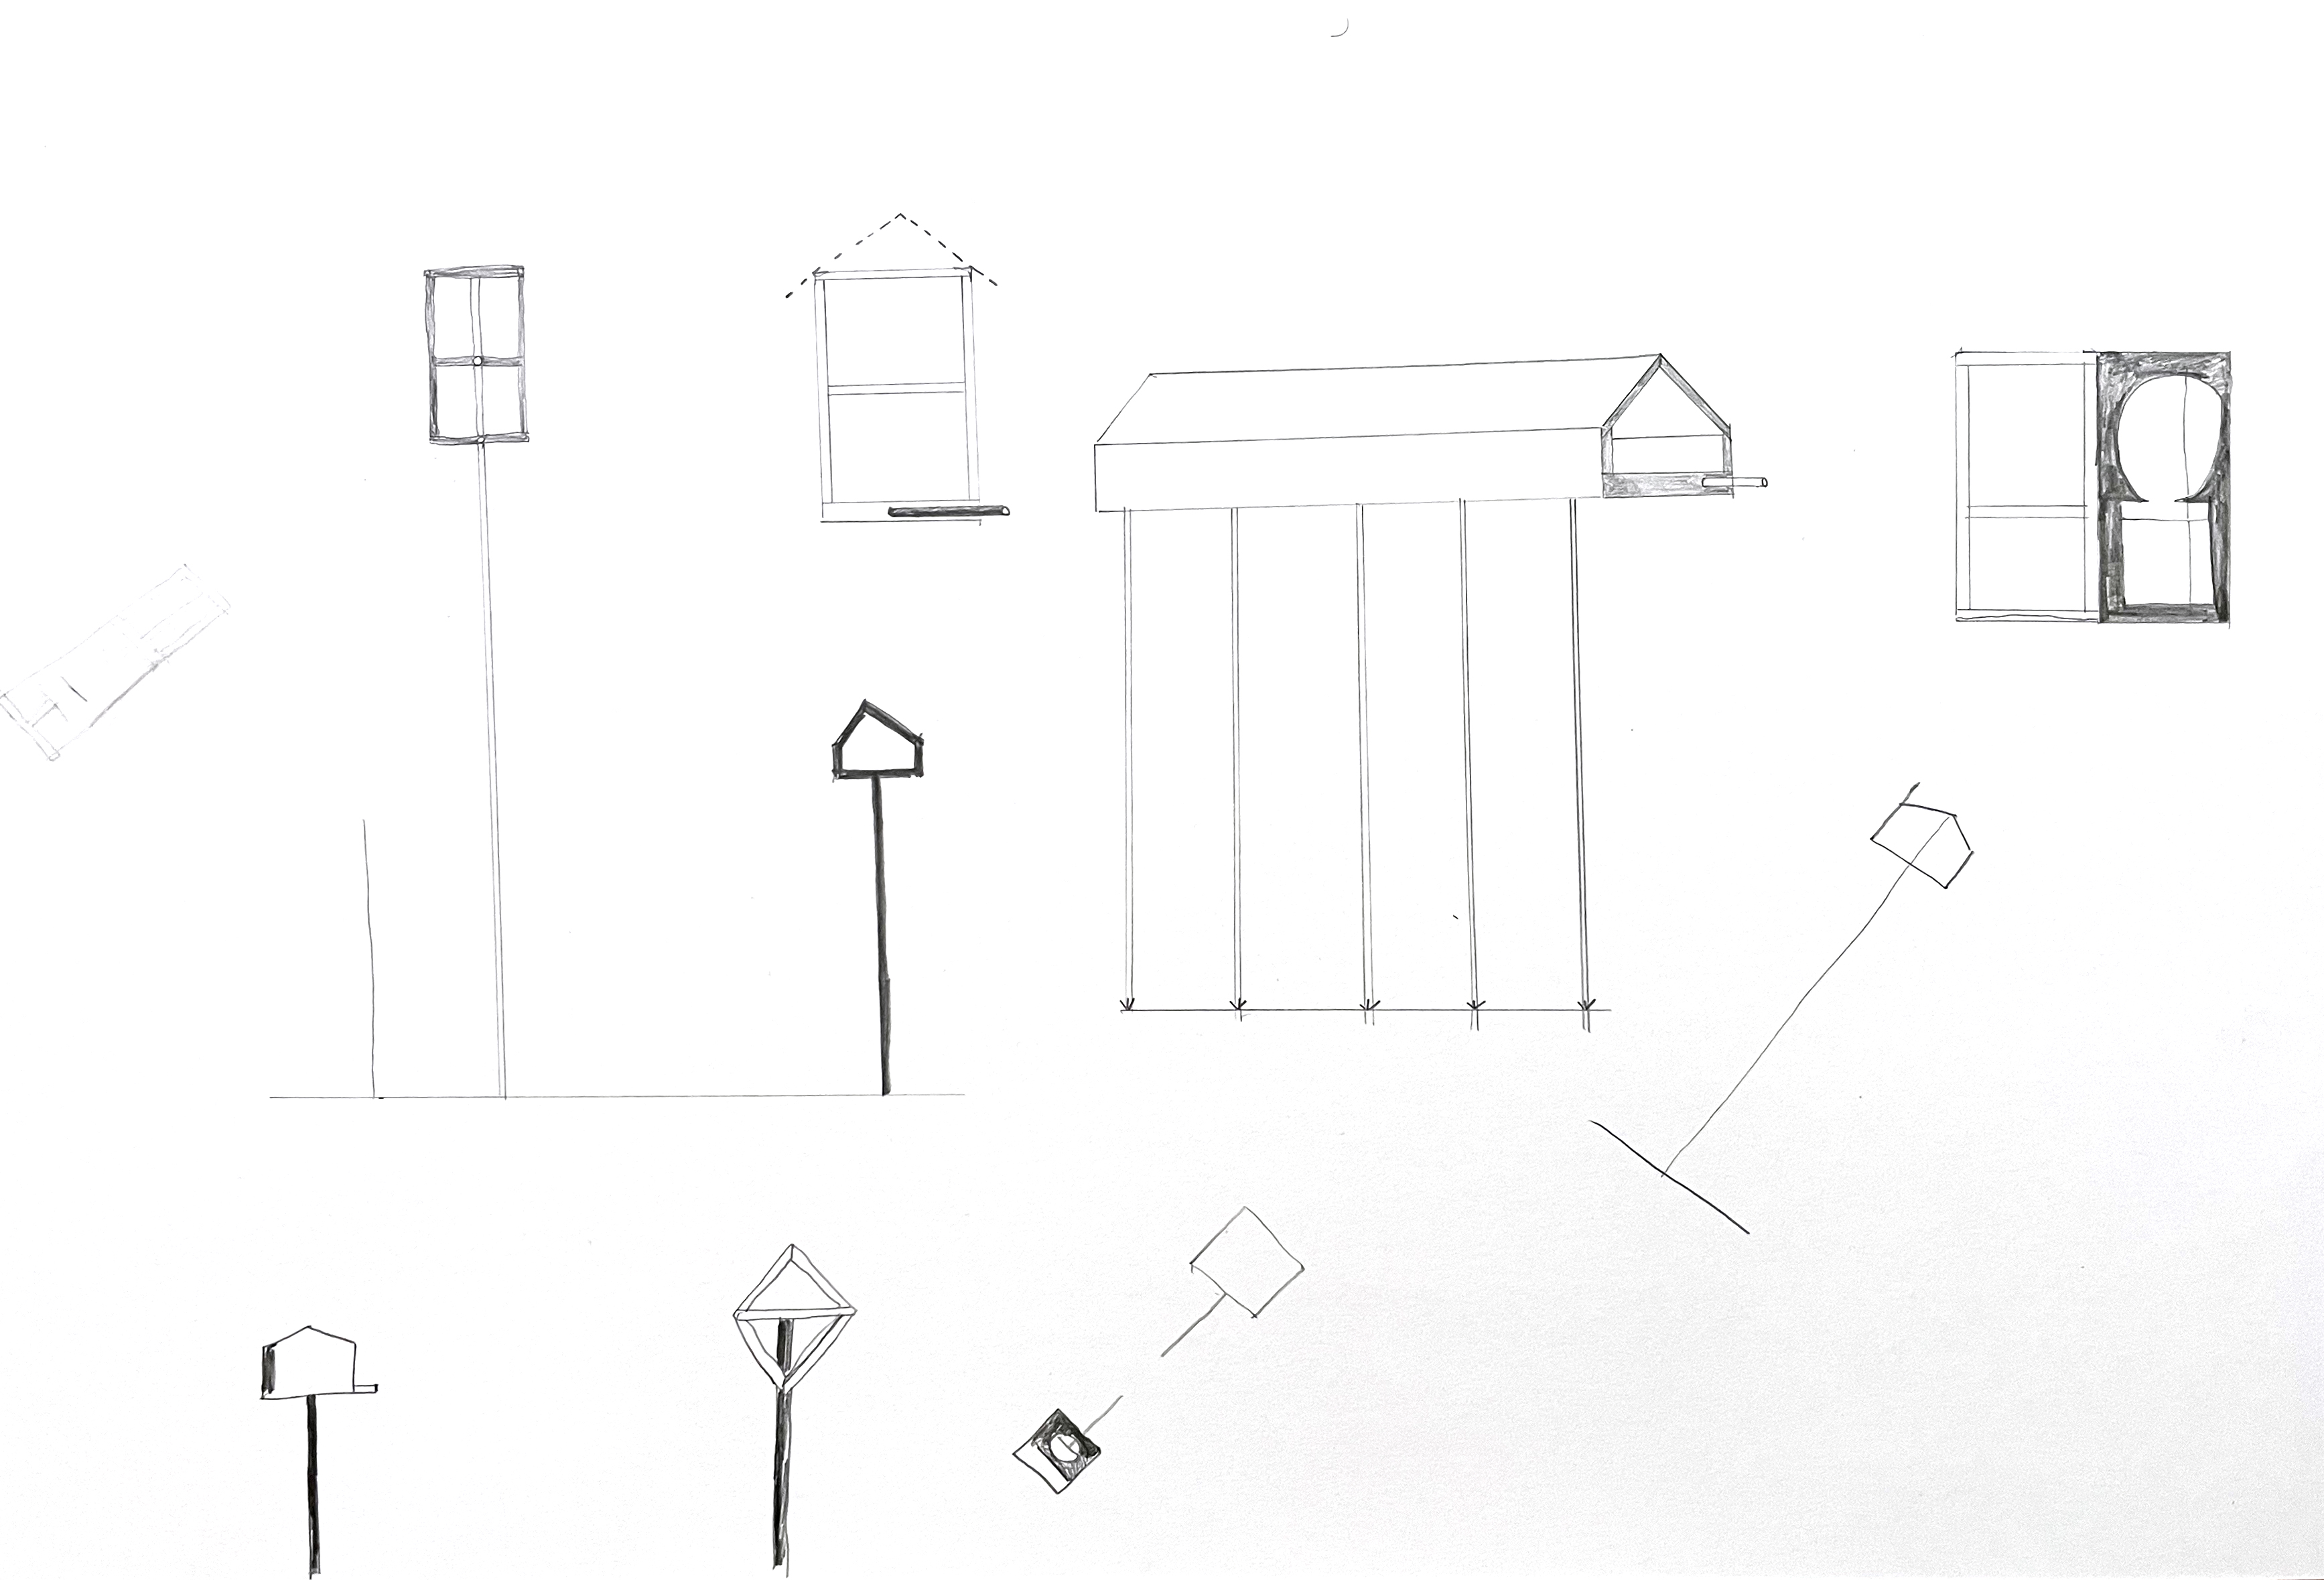 multiple small drawings of different birdhouse designs, some with many legs, some rectangular, and some rhomboid